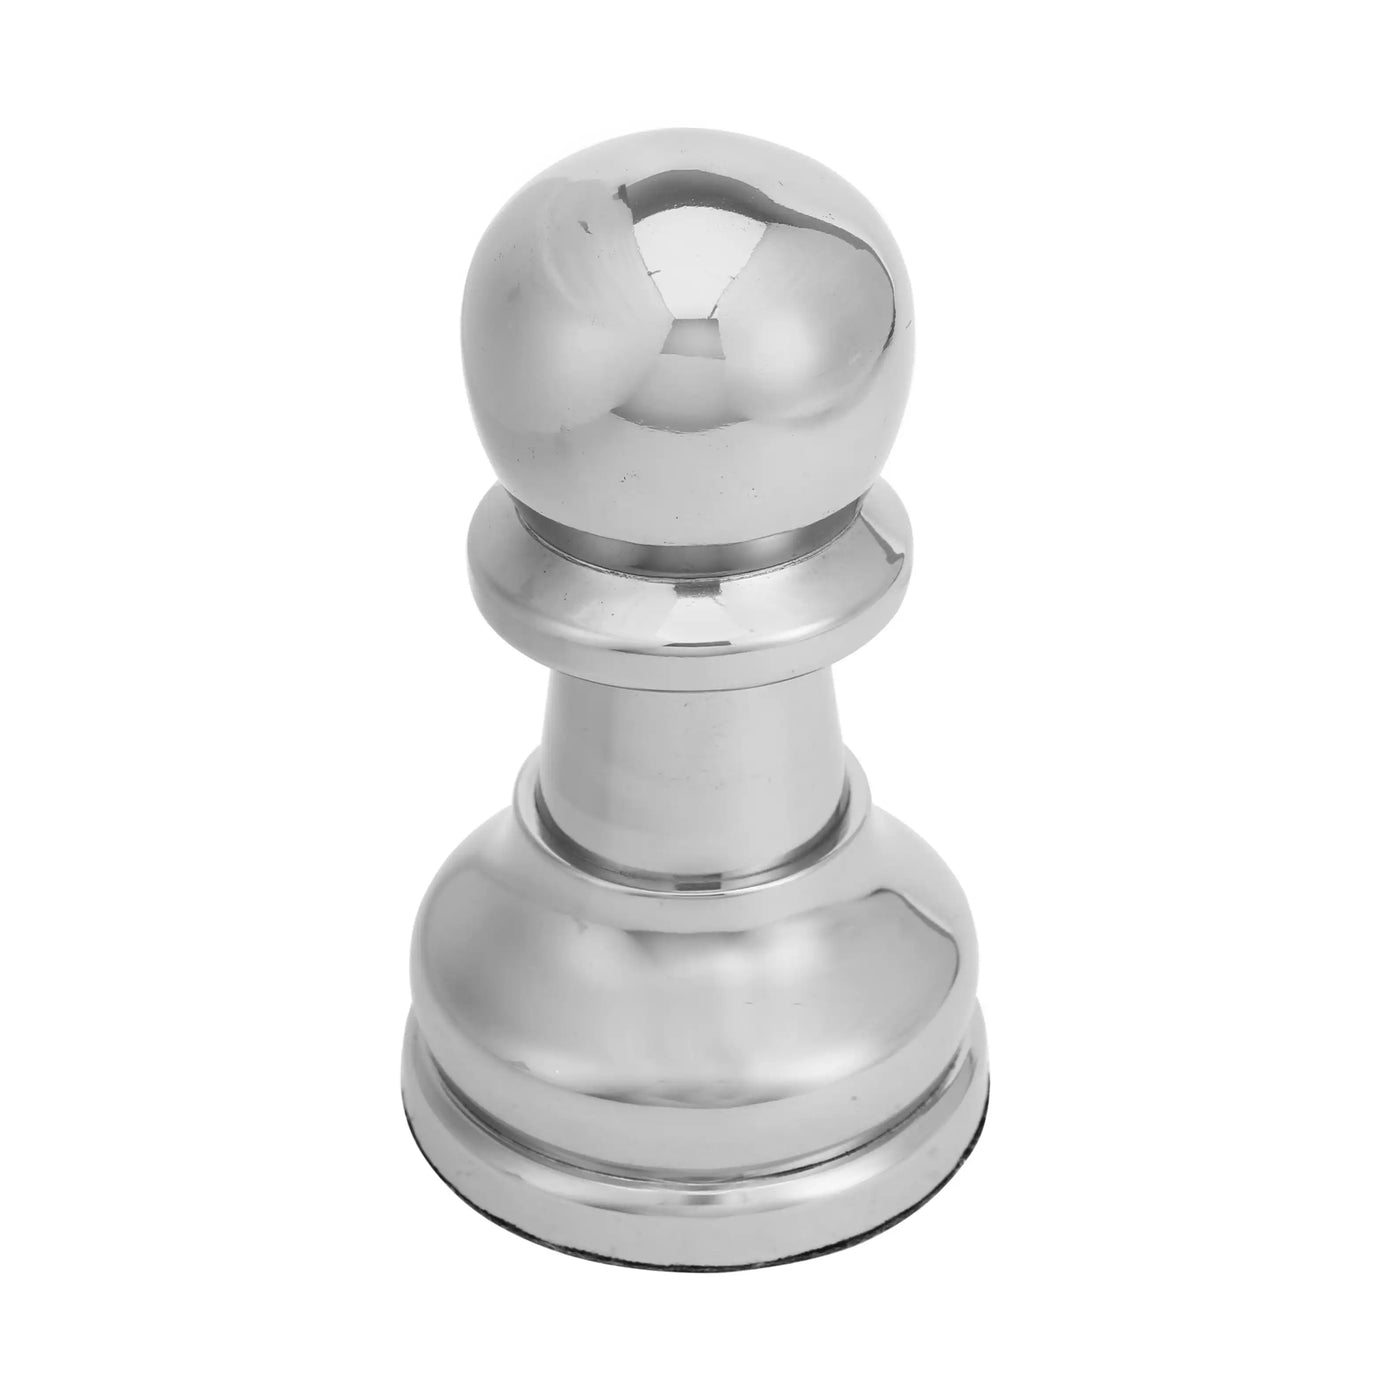 Chess Pawn Silver Over-Size-70-330-14-1